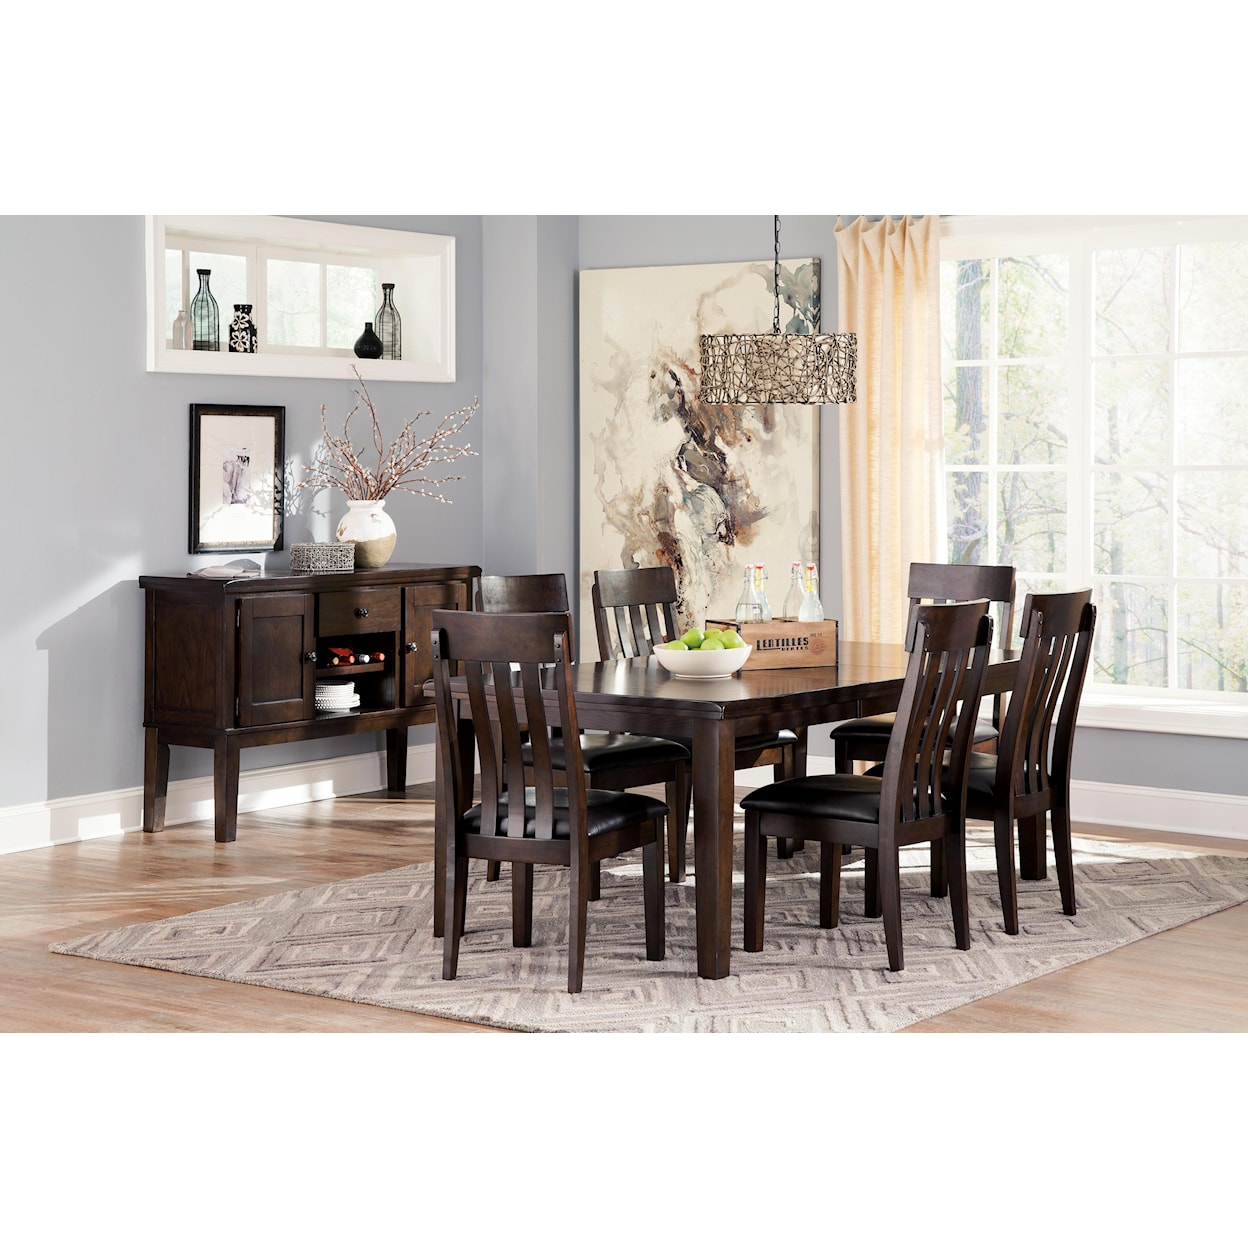 Signature Design by Ashley Haddigan Formal Dining Room Group